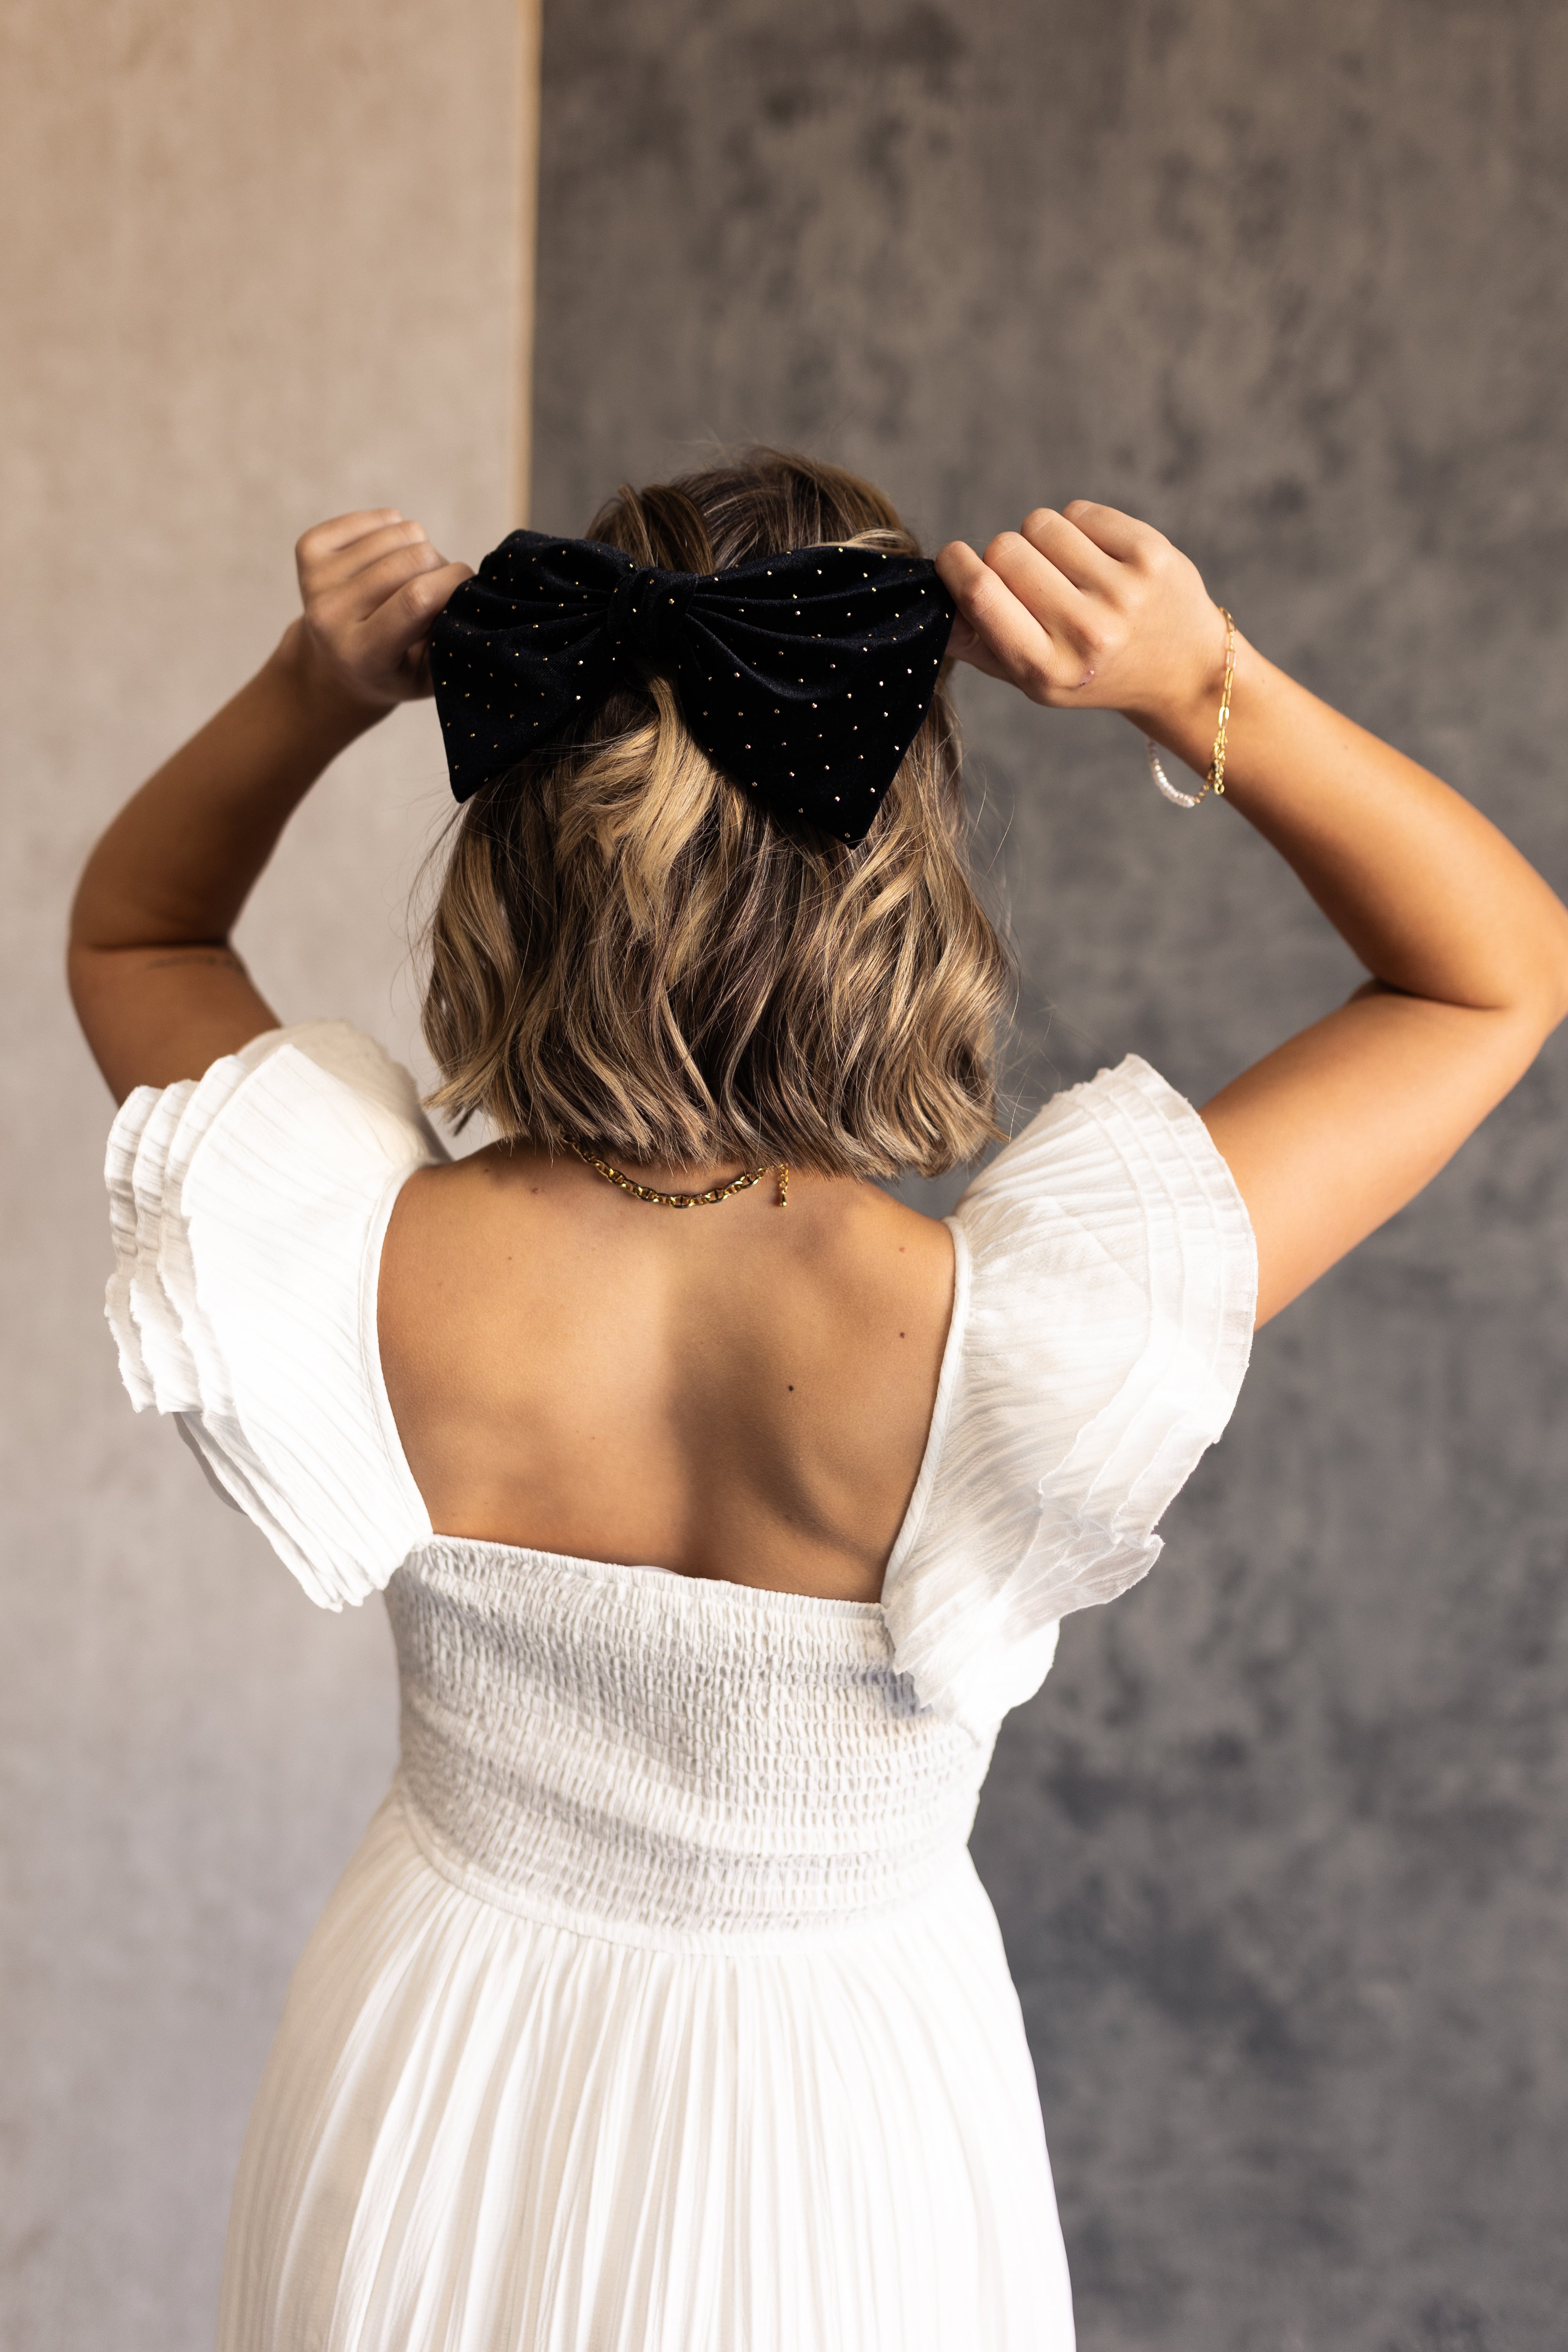 Image shows back of model's hair. Model is wearing the Stacia Black & Gold Velvet Hair Bow that features black velvet fabric with gold dot embellishments and a clasp closure.